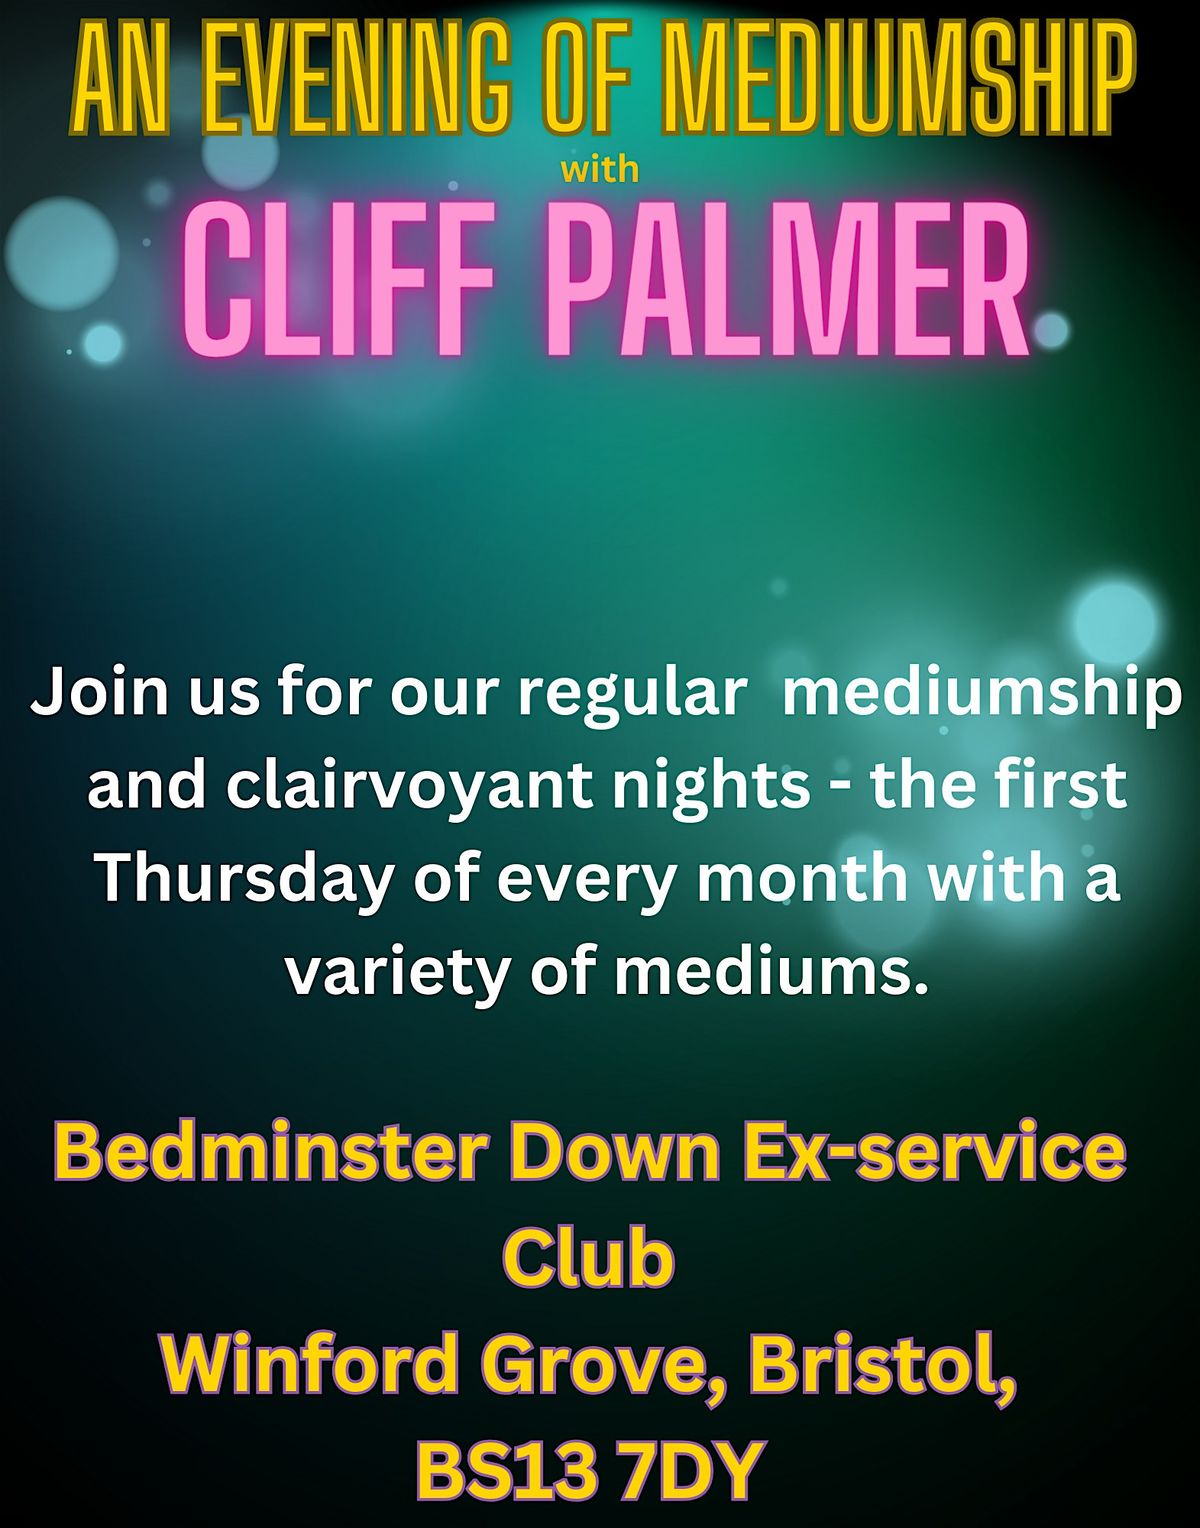 Evening of Clairvoyance & Mediumship - with Cliff Palmer